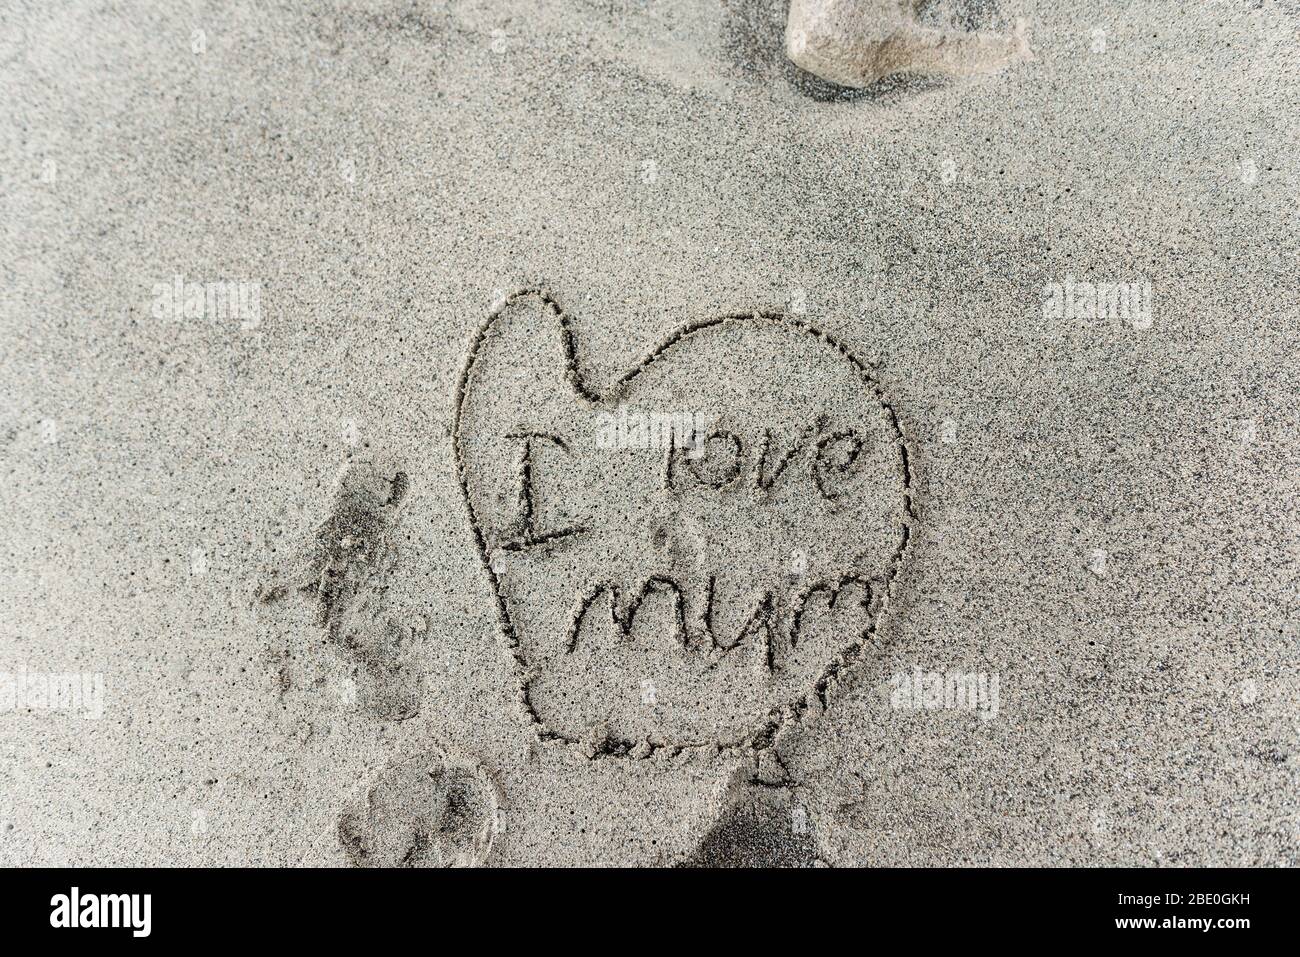 Child's drawing in sand of heart with I love mum written inside Stock Photo